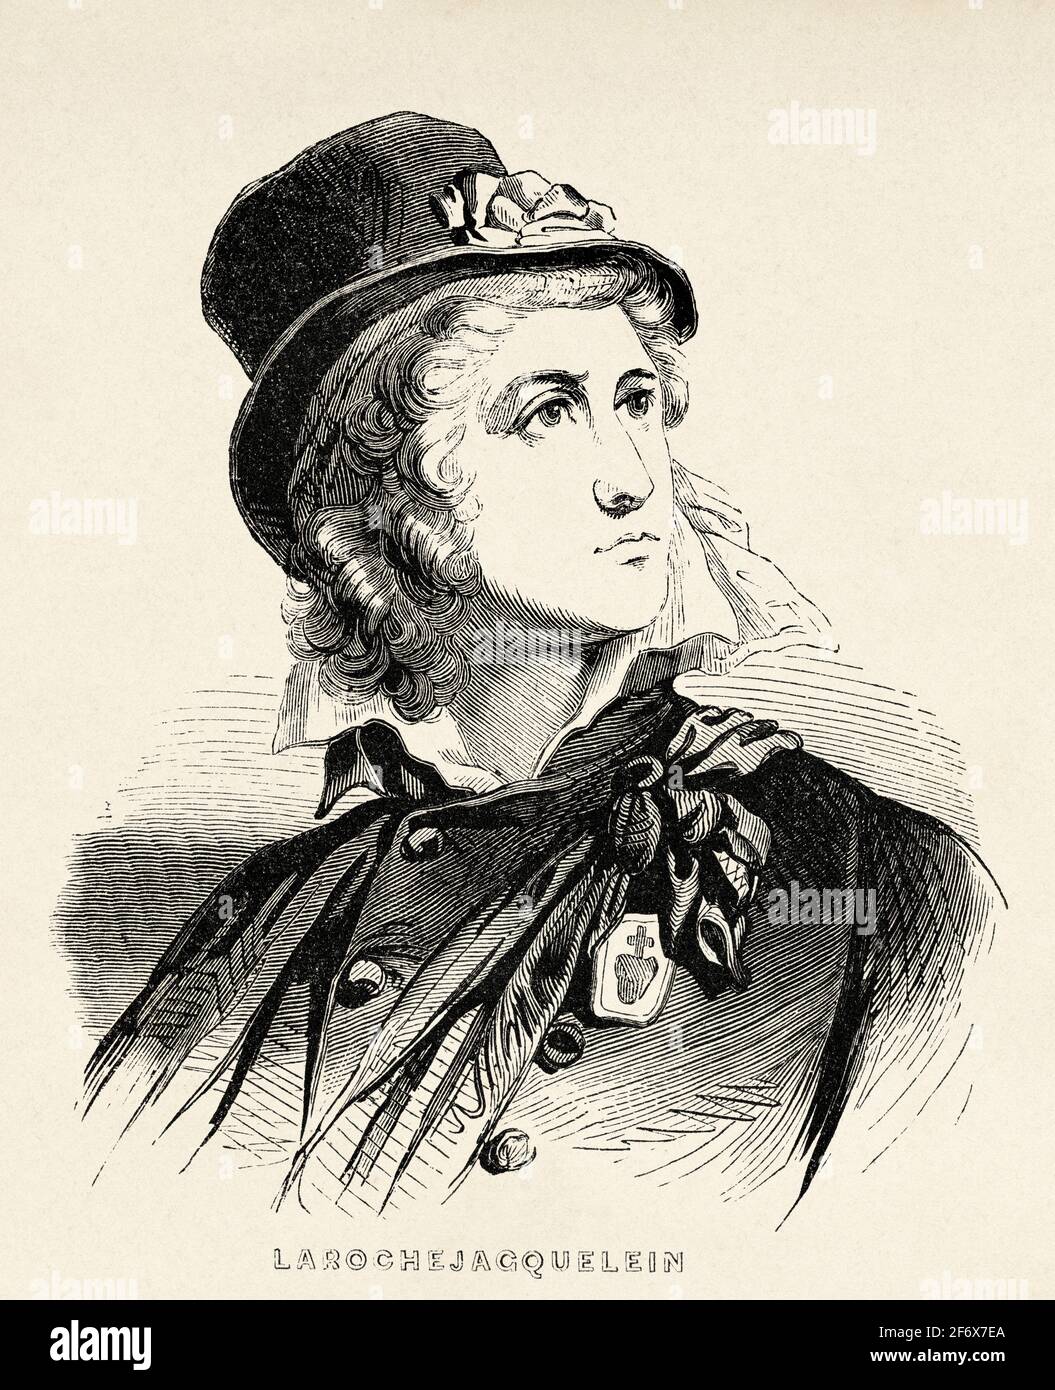 Portrait of Heinrich Duverger Count of Laroche-Jacquelin (1772-1794) French military commander. France, French Revolution 18th century. Old engraved illustration from Histoire de la Revolution Francaise 1845 Stock Photo